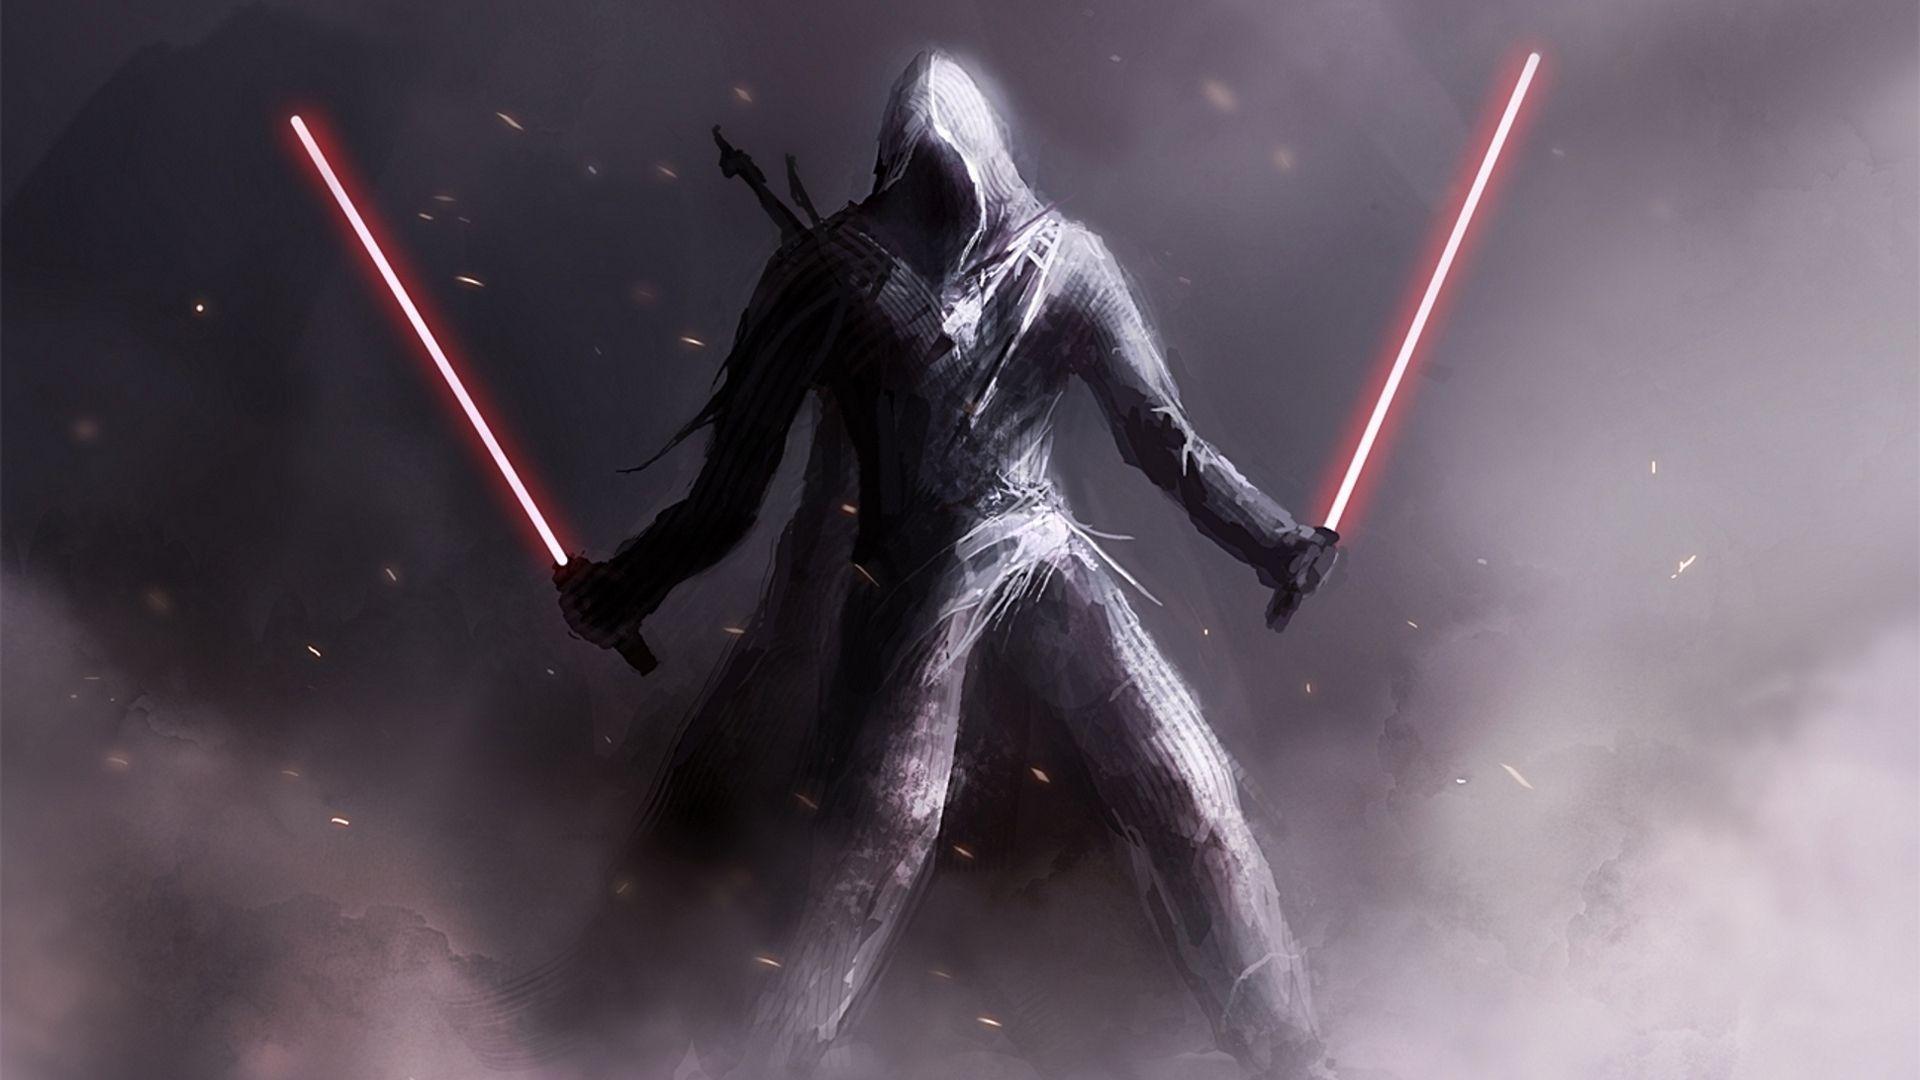 Star Wars Sith Wallpaper Background Is Cool Wallpaper. a